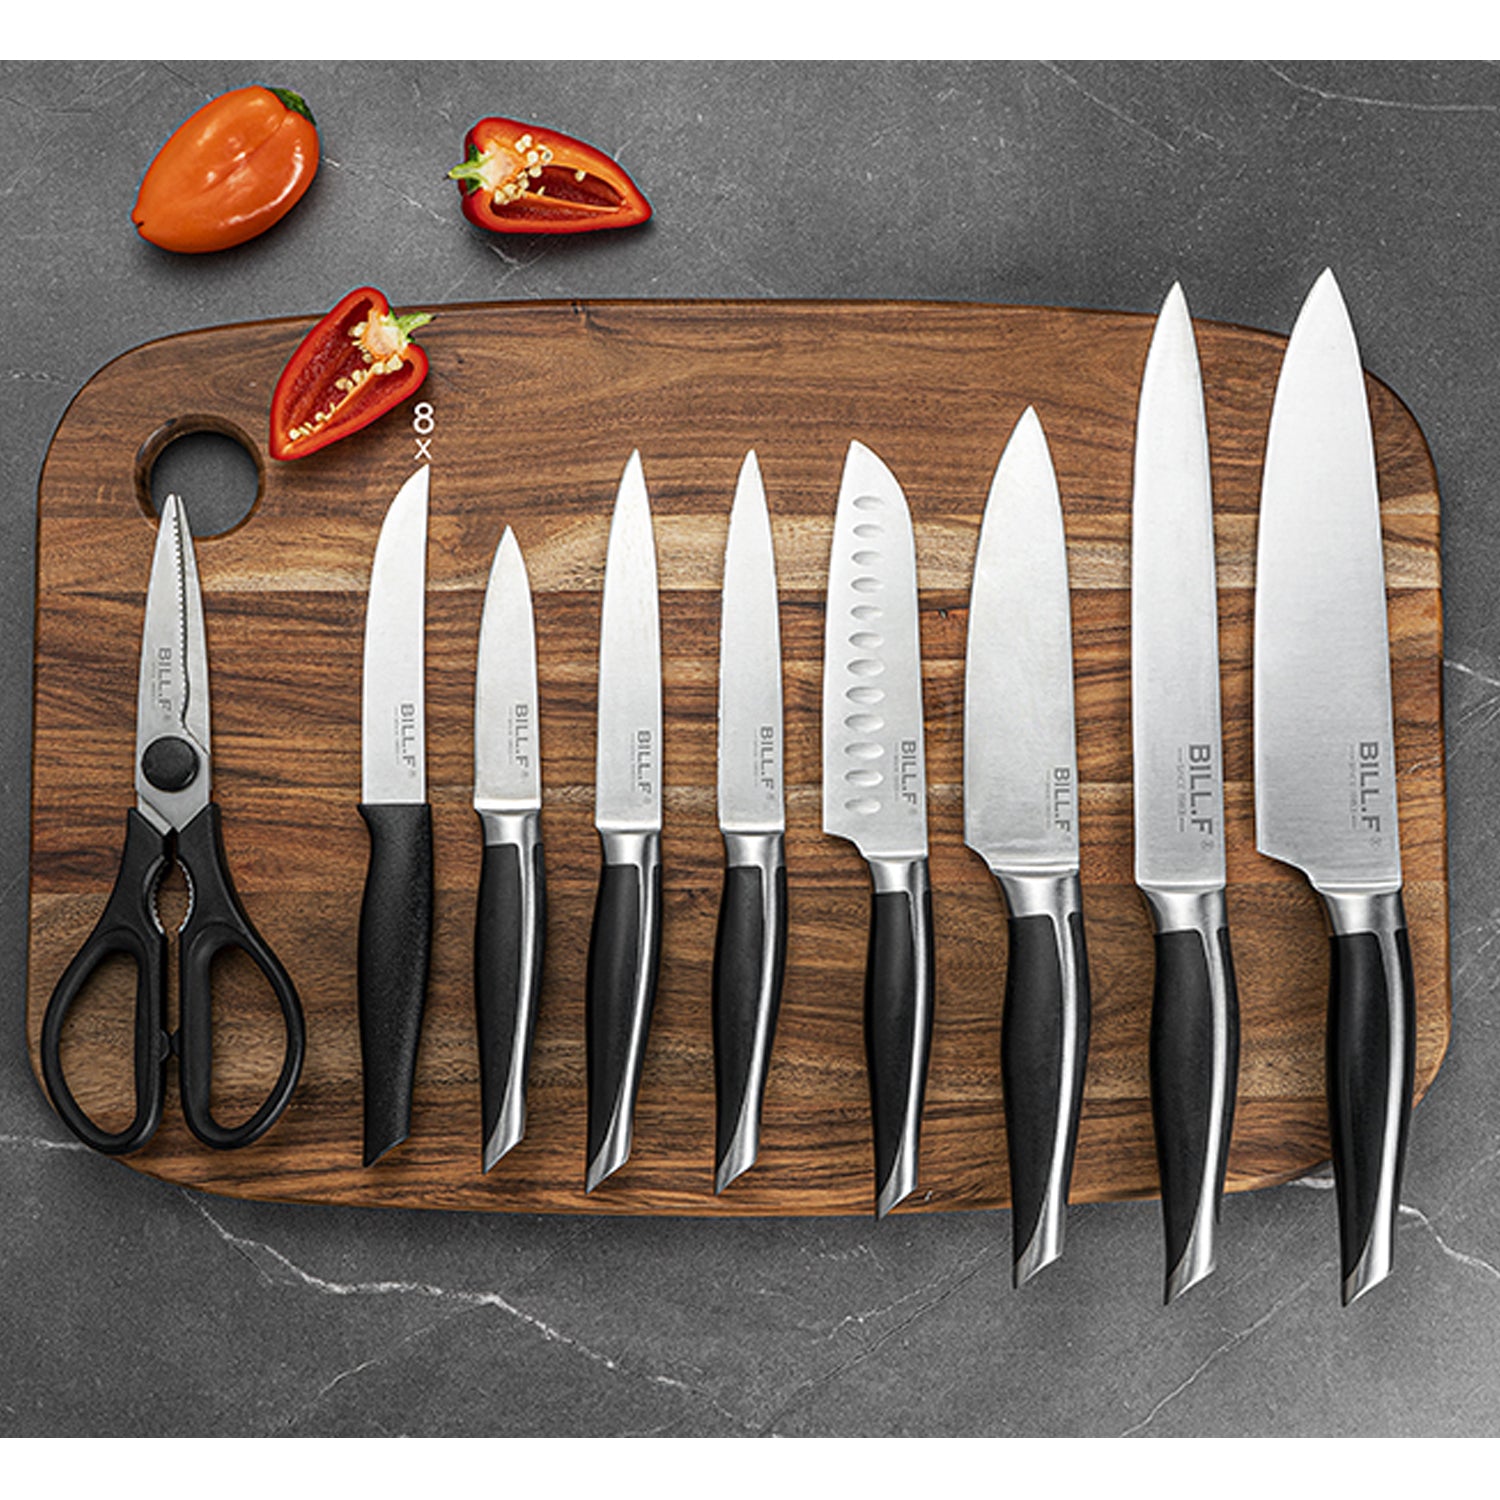 This 17-Piece Knife Set With 52,000+ 5-Star Reviews Is on Sale for $39